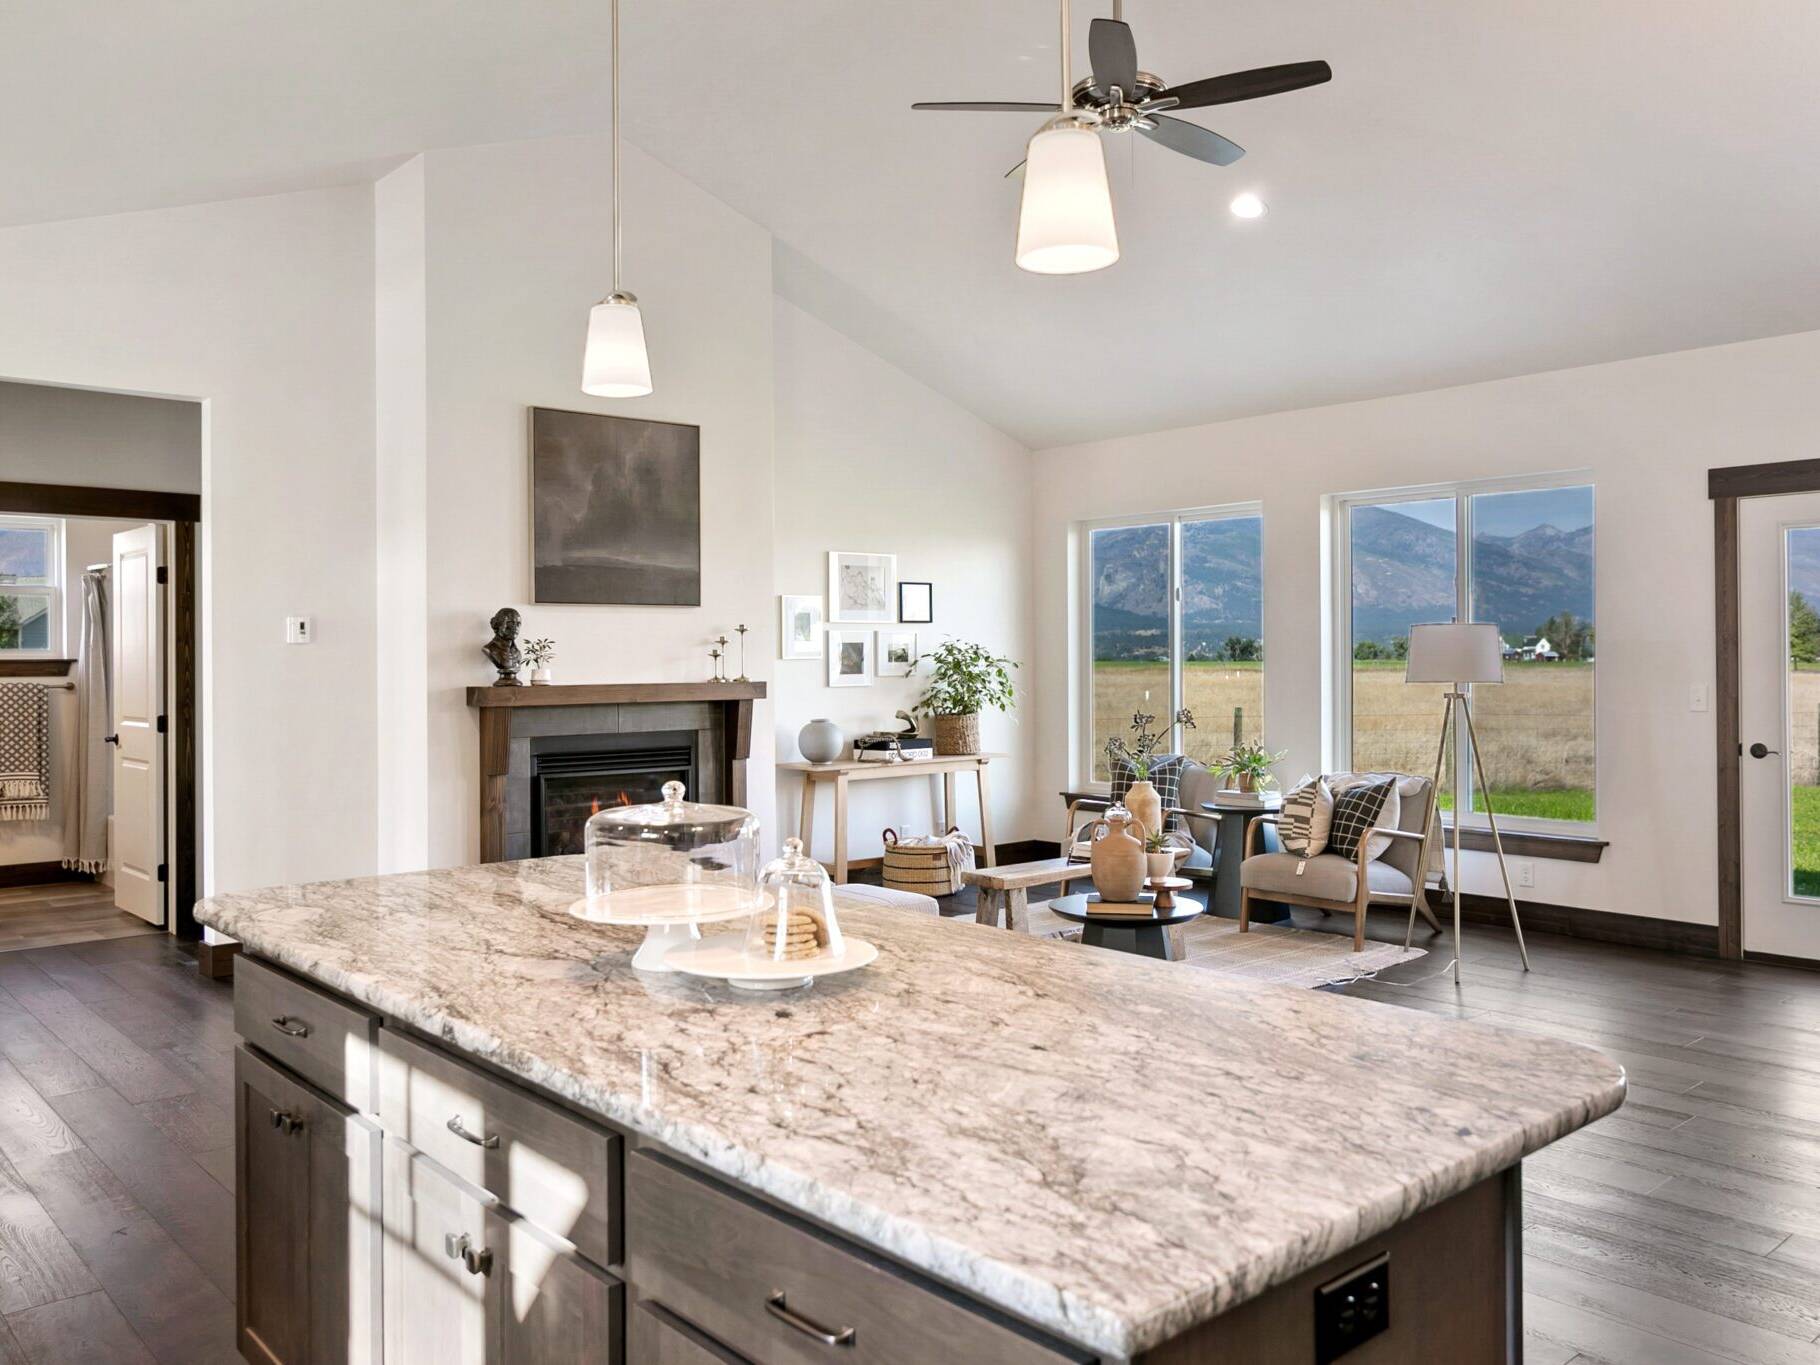 Kitchen island in The Seeley model home - Built by Big Sky Builder in Hamilton, MT